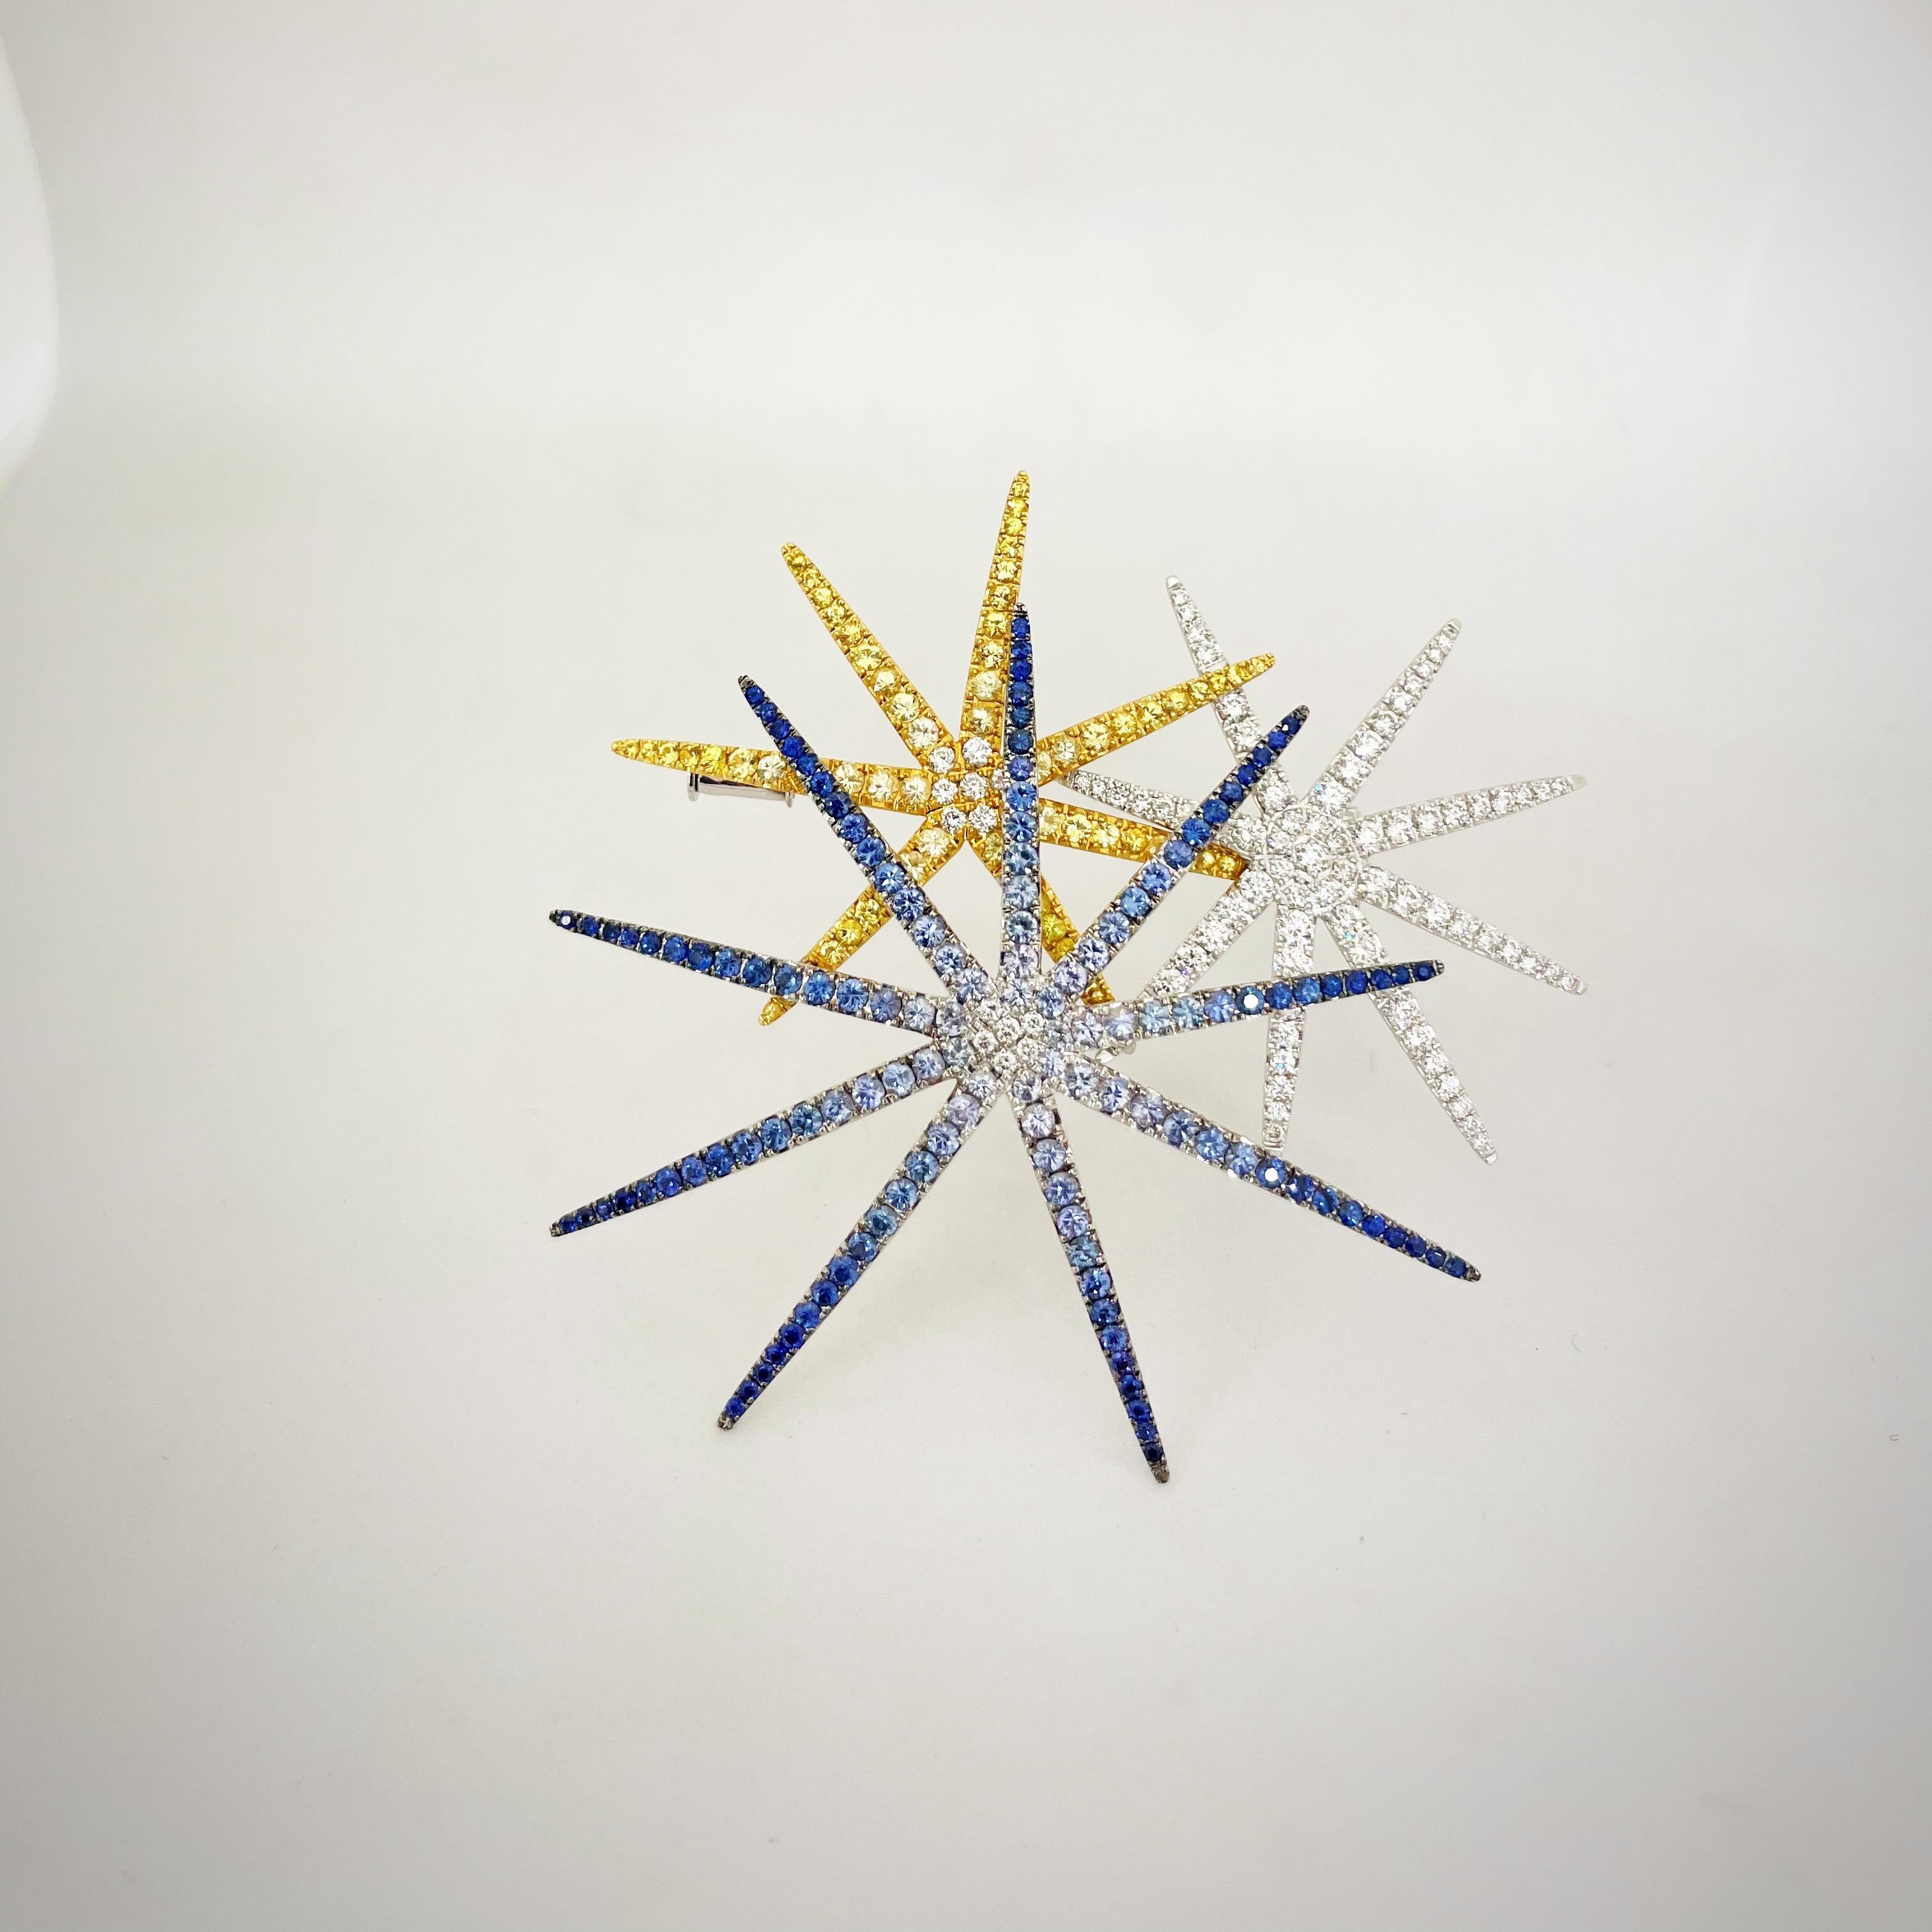 Modern Cellini 18 Karat WG, Fireworks Brooch with Blue & Yellow Sapphires and Diamonds For Sale